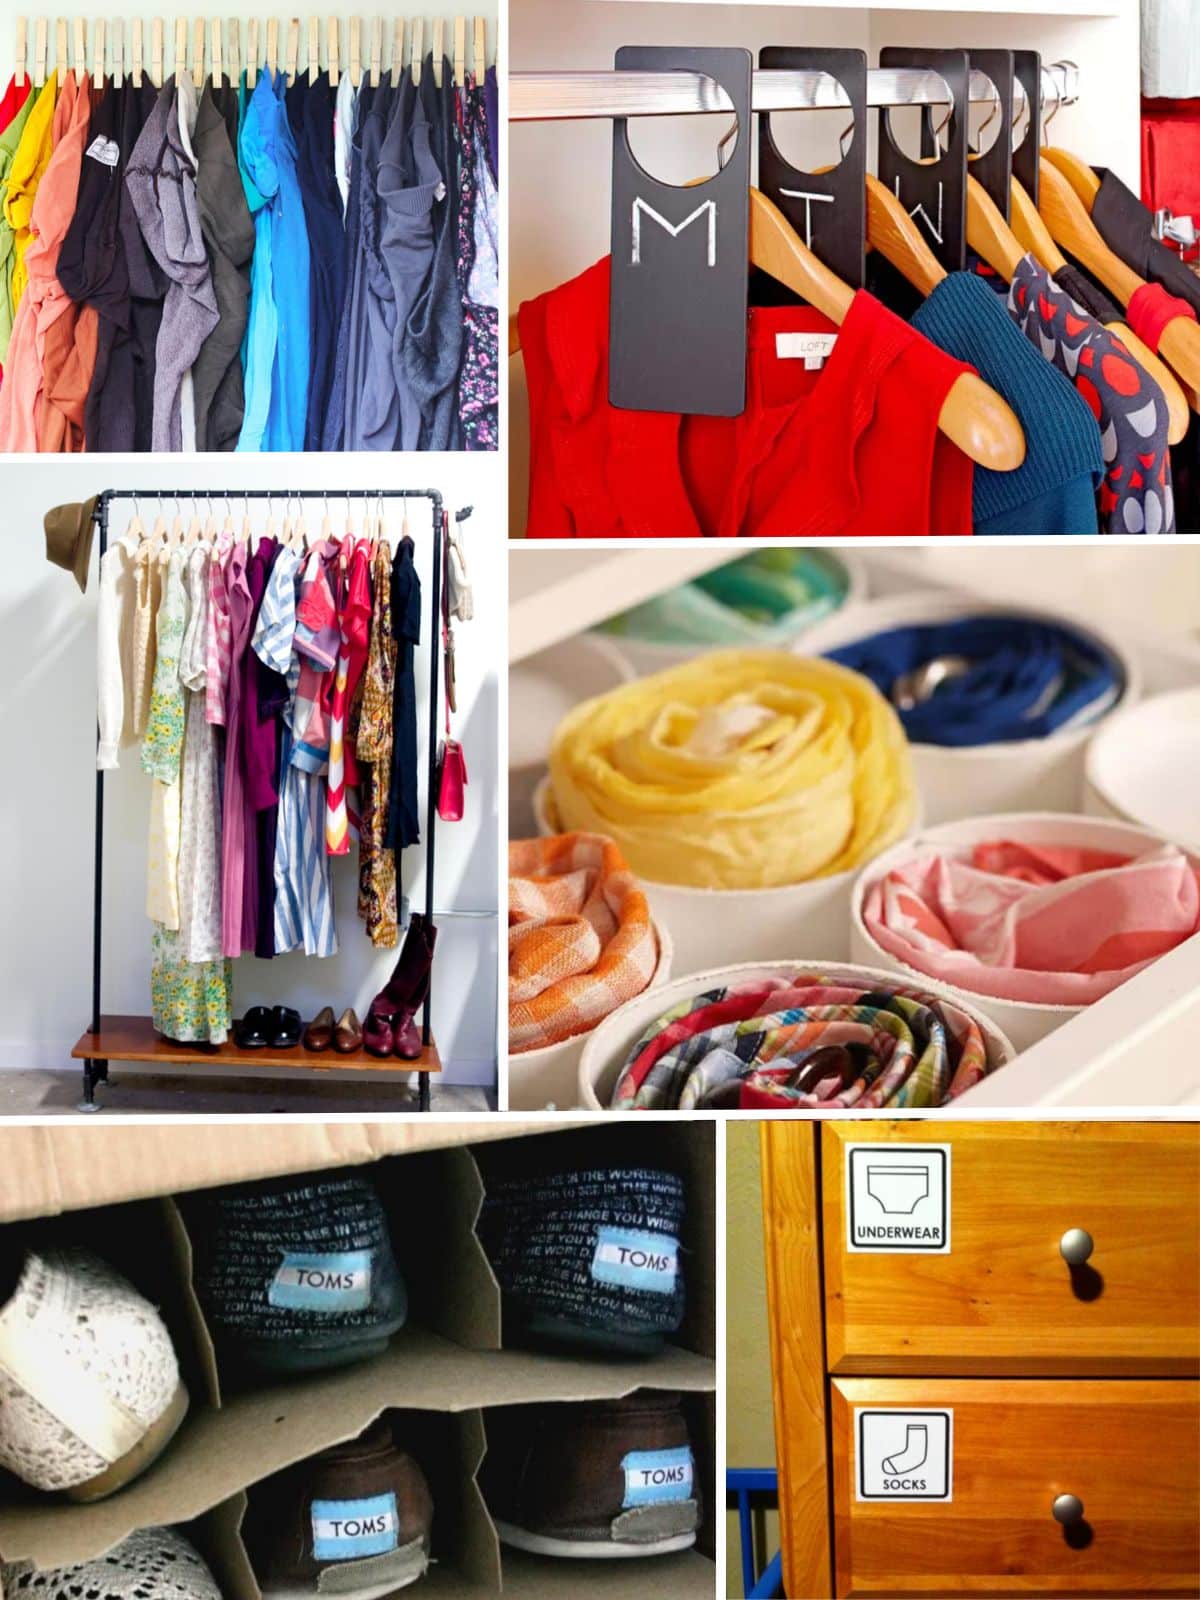 40 Brilliant Closet and Drawer Organizing Projects collage.